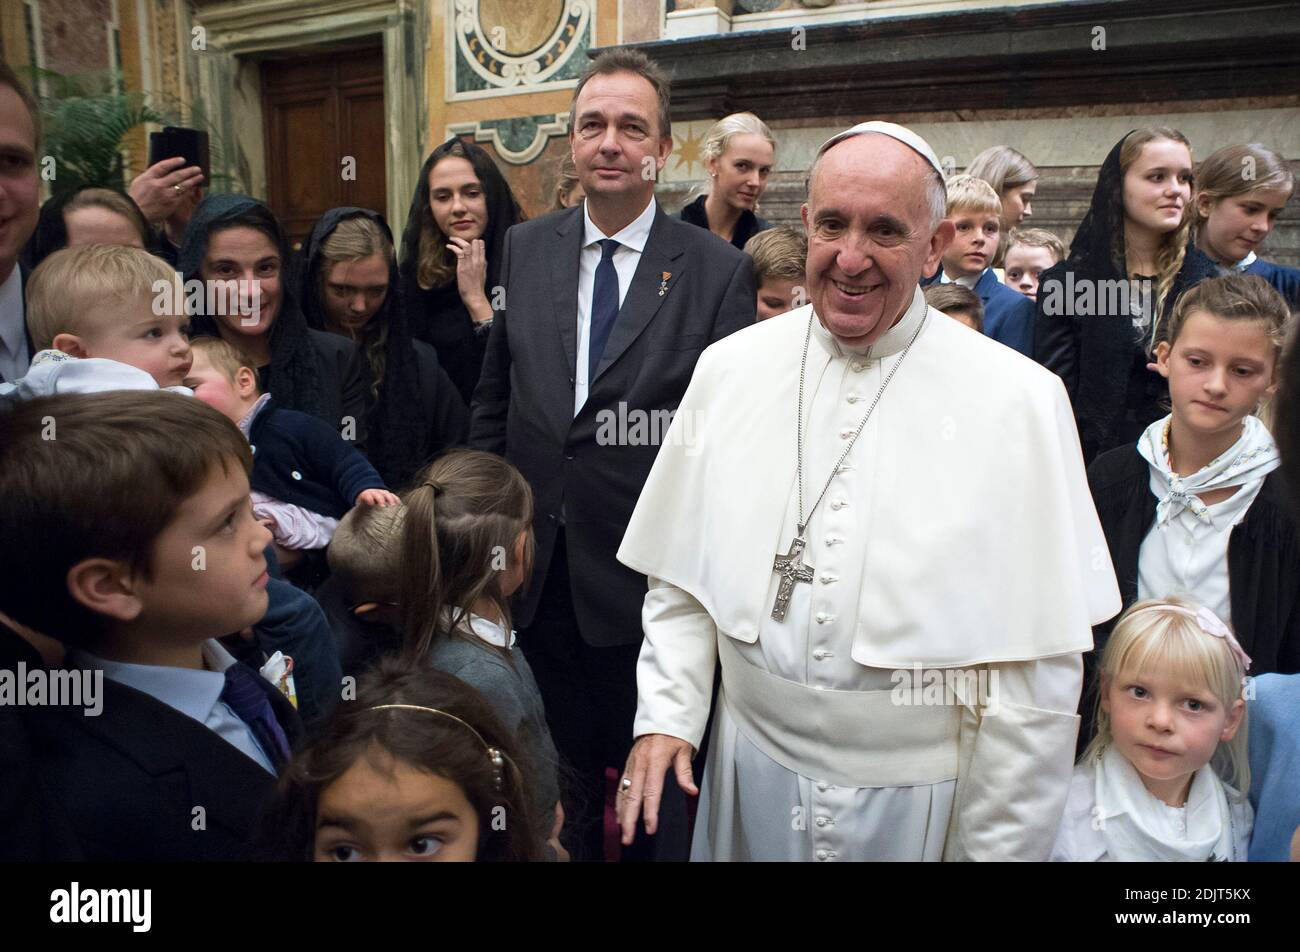 The Habsburg family led by Karl von Habsburg meets pope Francis during a private audience at the Vatican on November 5, 2016. In the Clementine Hall Pope Francis received three hundred members of the Habsburg family, in Rome on the occasion of the Jubilee of Mercy. Photo by ABACAPRESS.COM Stock Photo